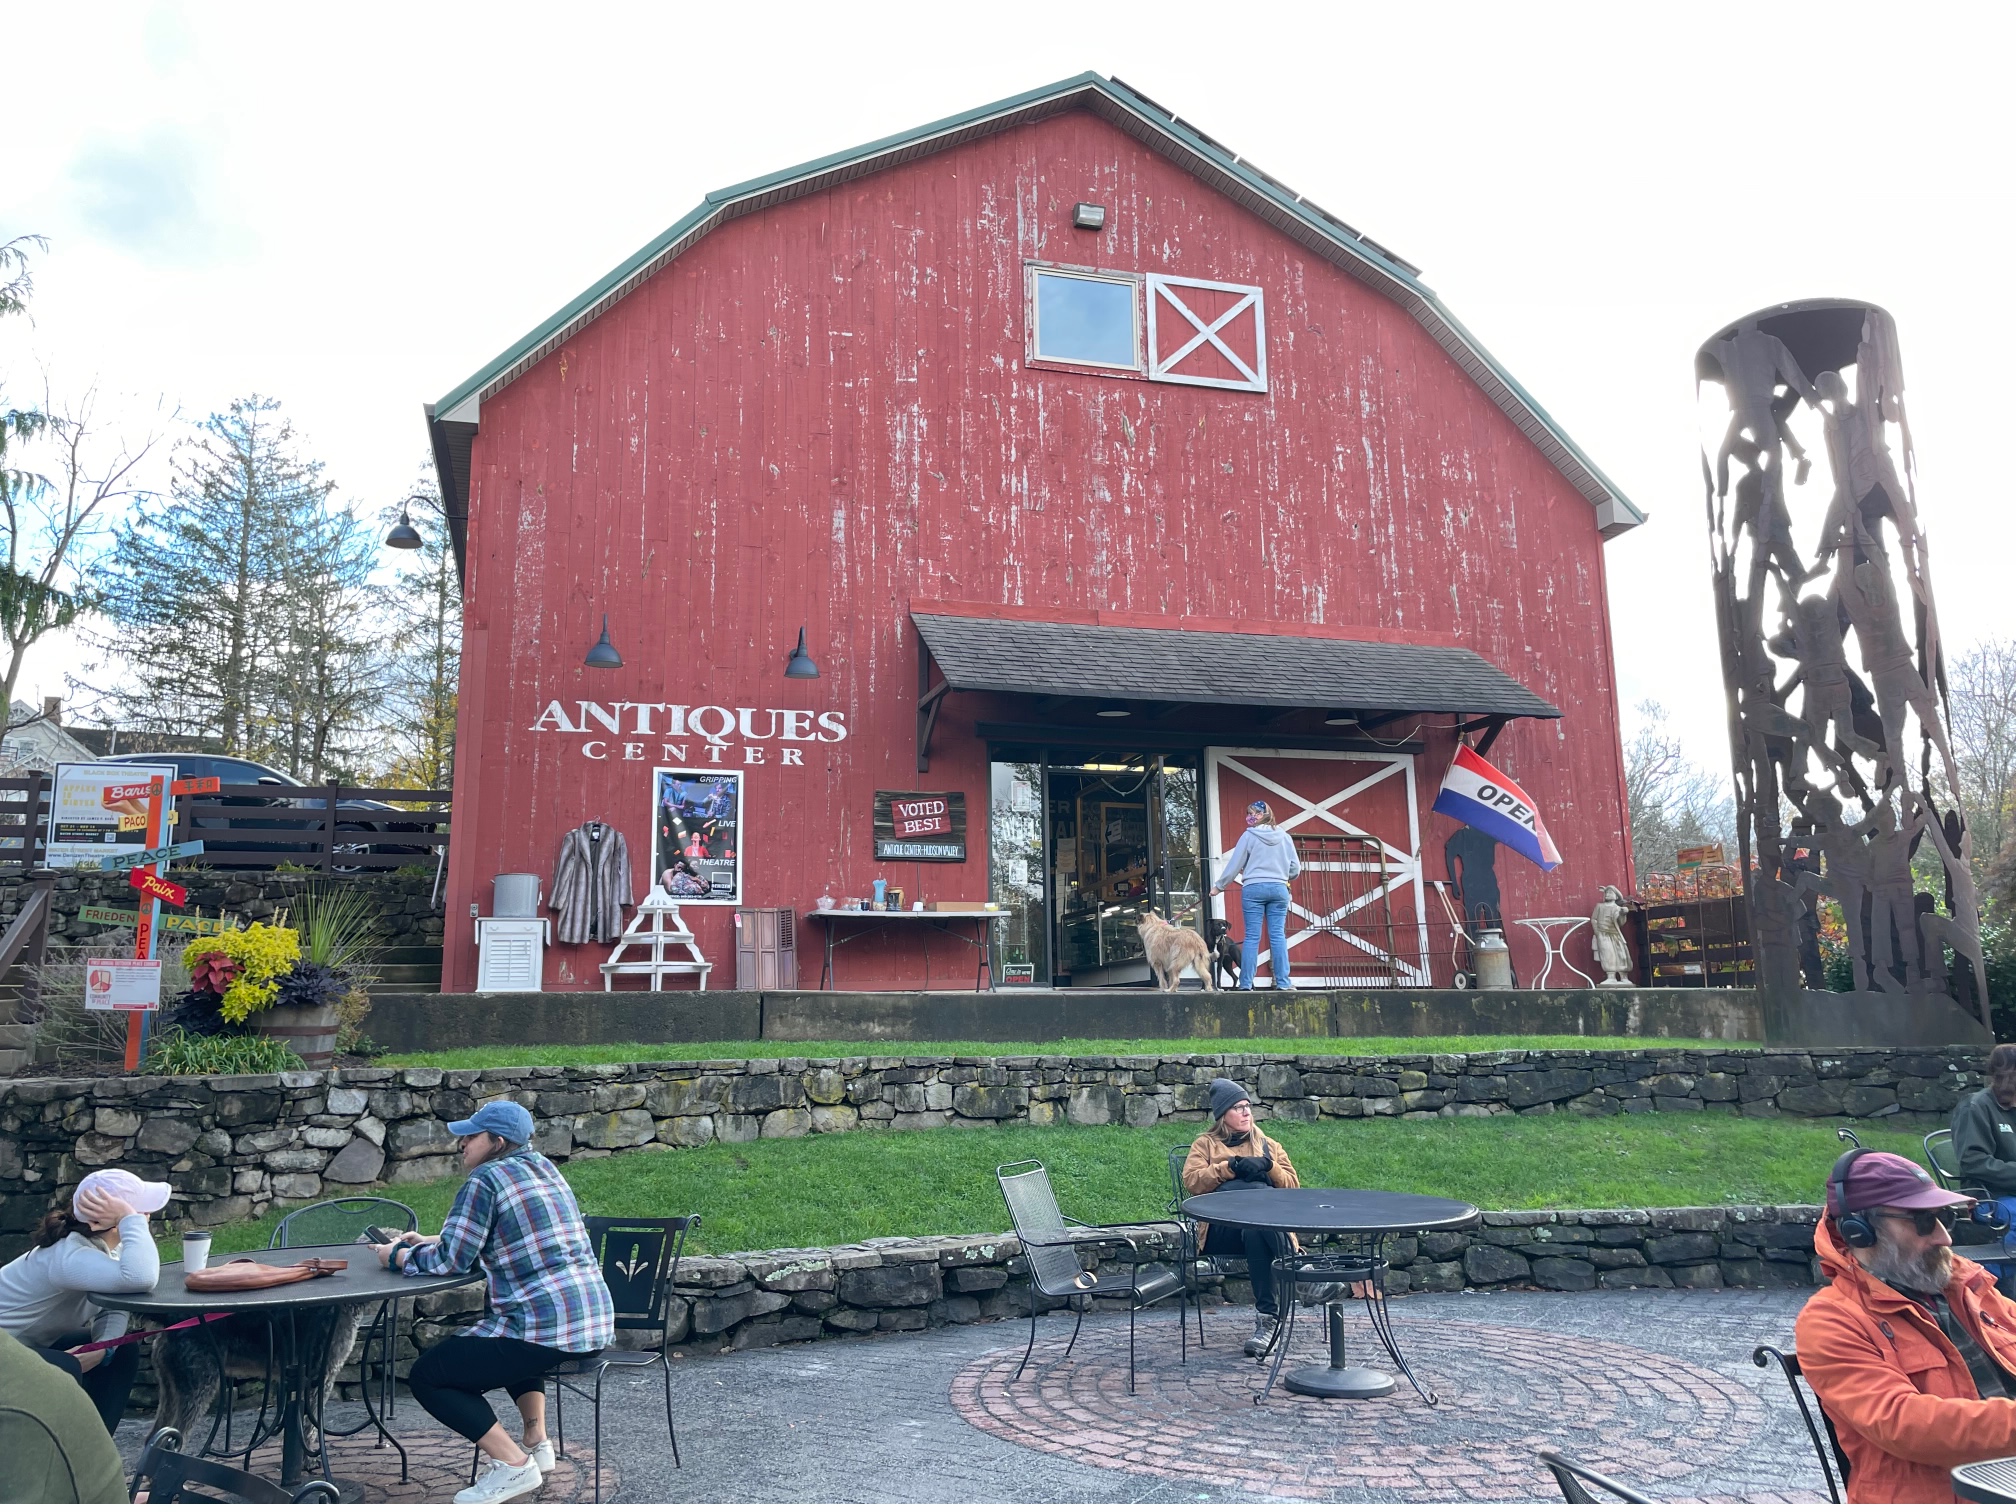 Antiques Archives - Visit Orange County, NY